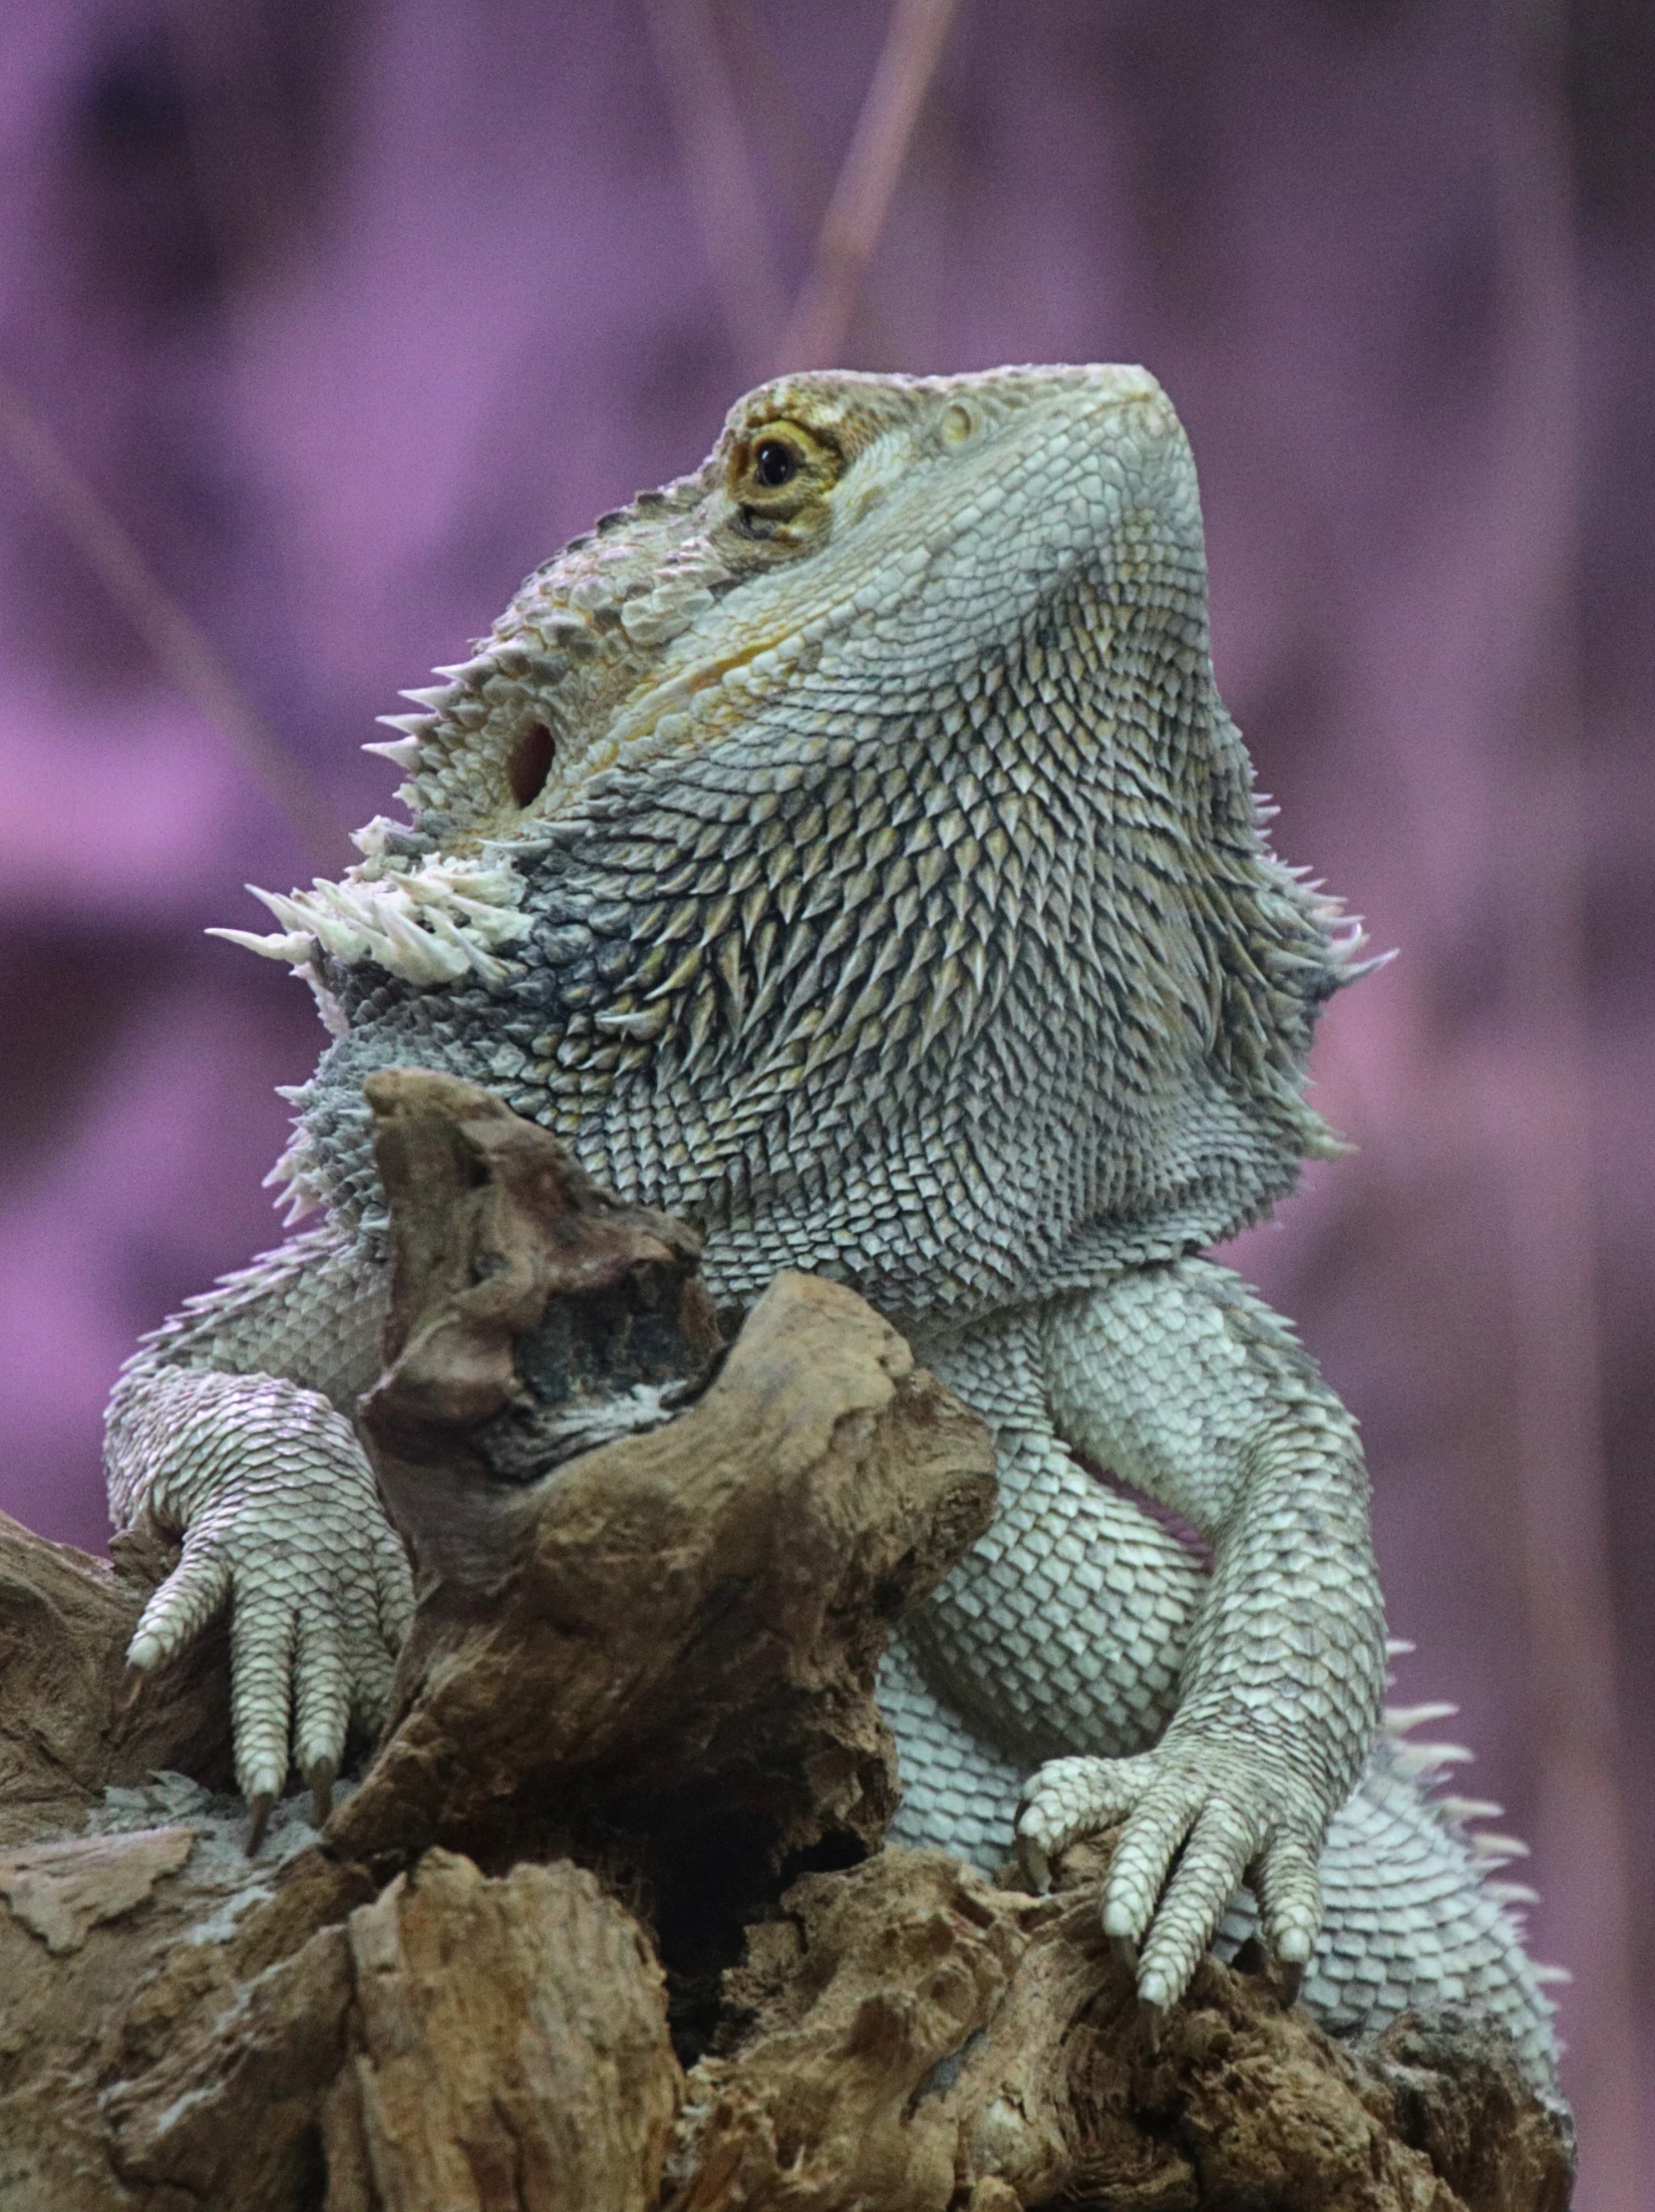 an iguana sits on a rock in front of some purple foliage